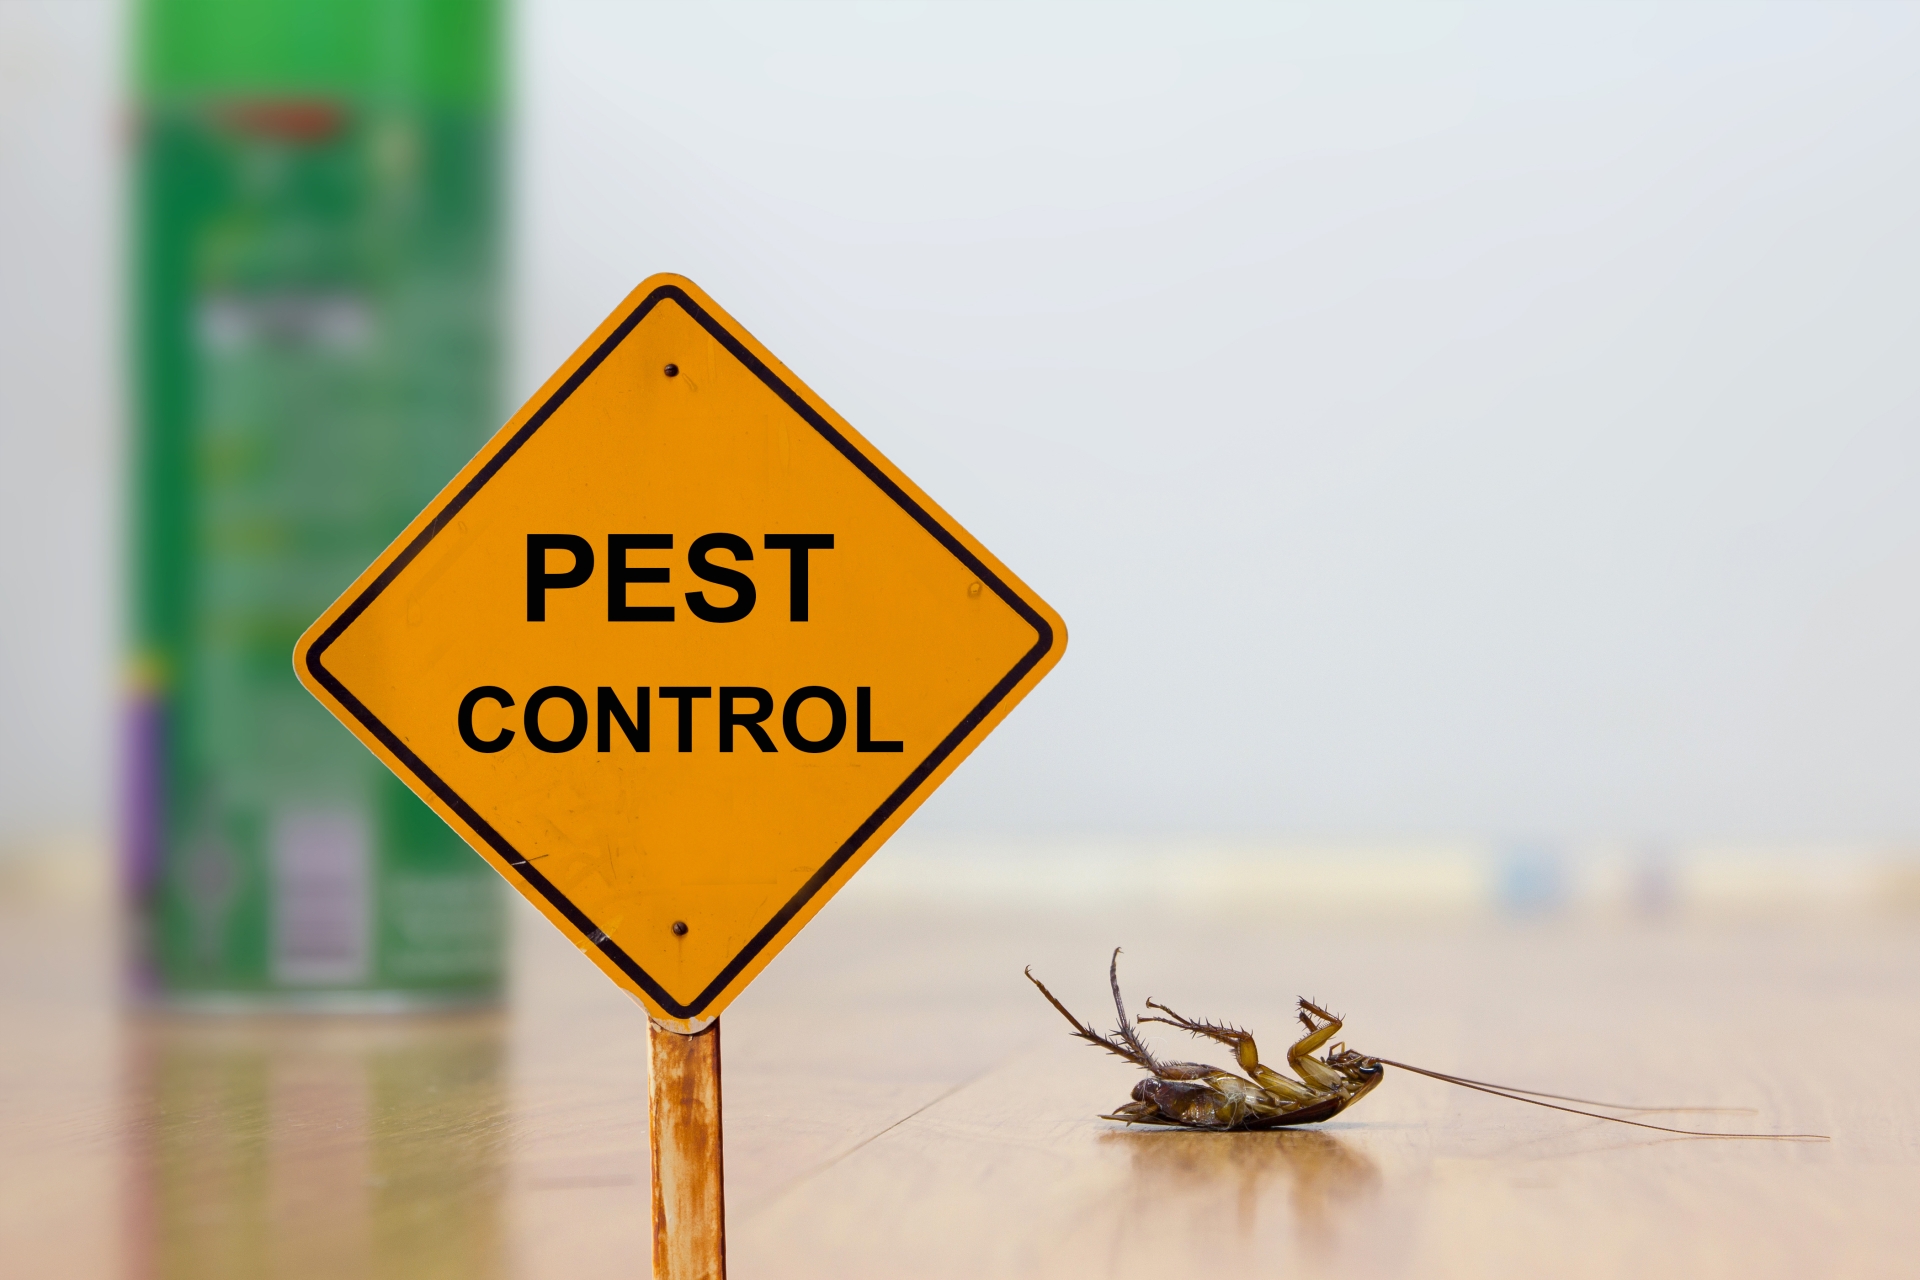 24 Hour Pest Control, Pest Control in Stockley Park, UB11. Call Now 020 8166 9746